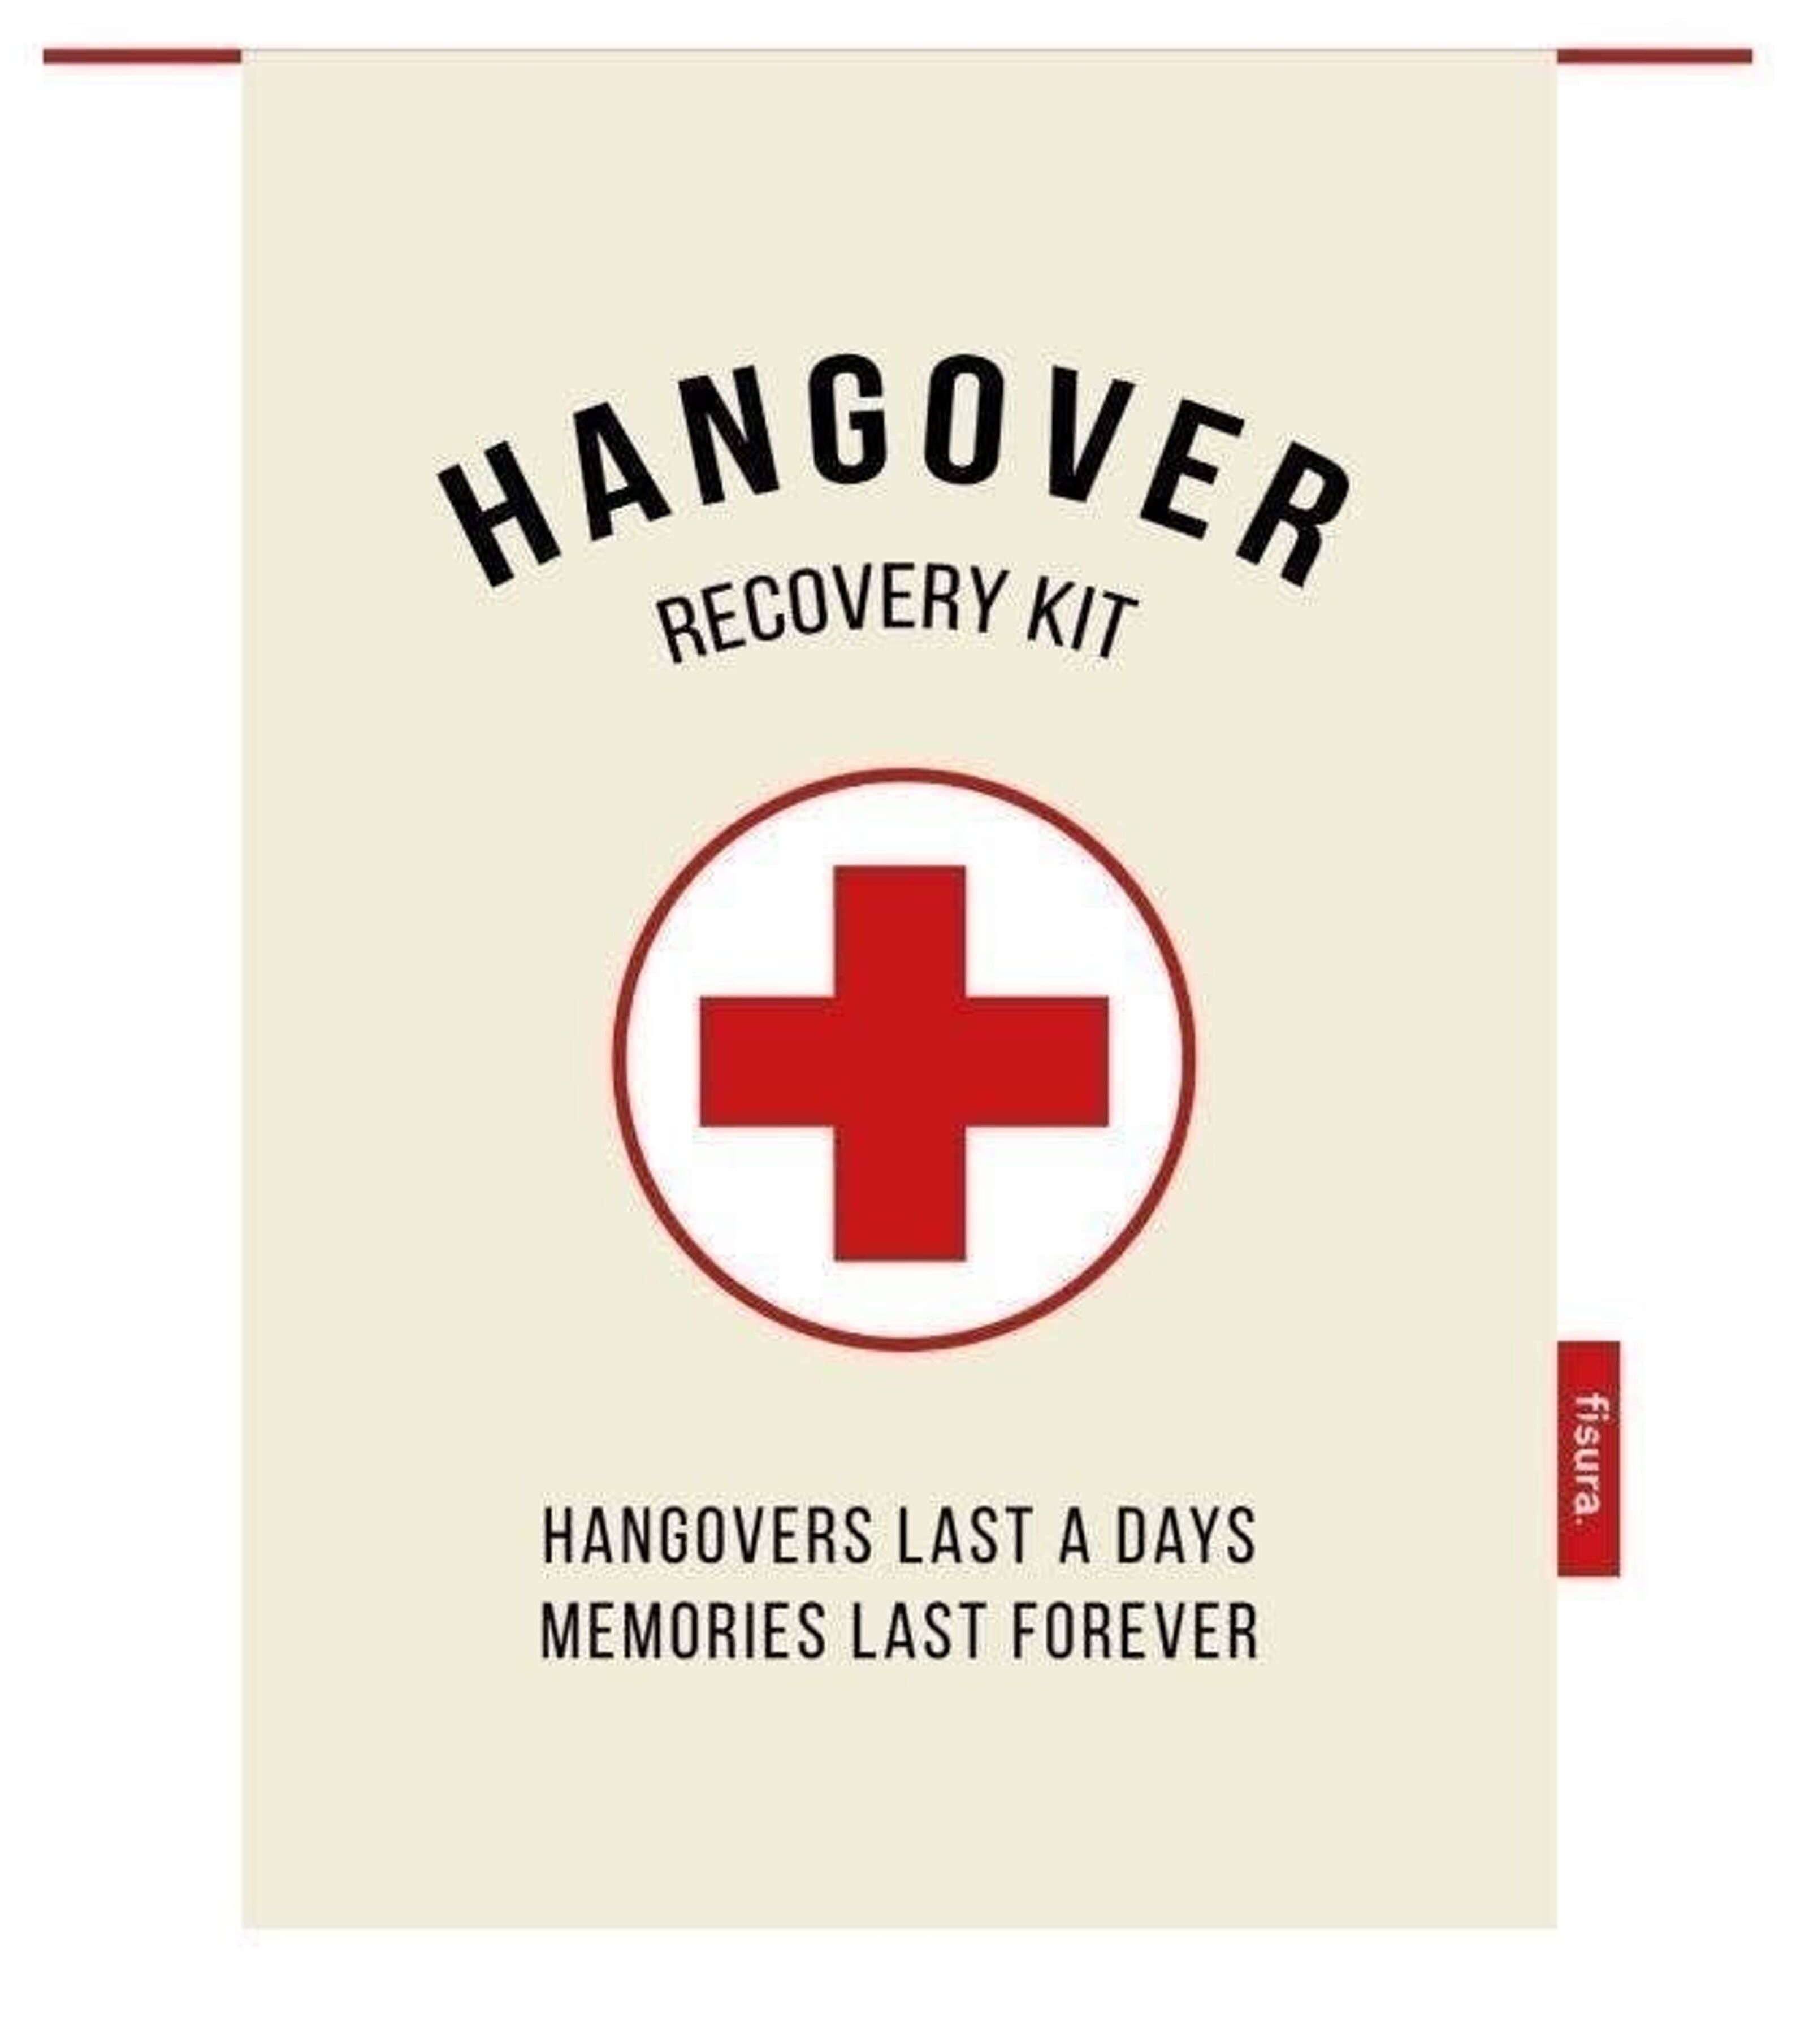 Hangover Recovery Kit (with ring)